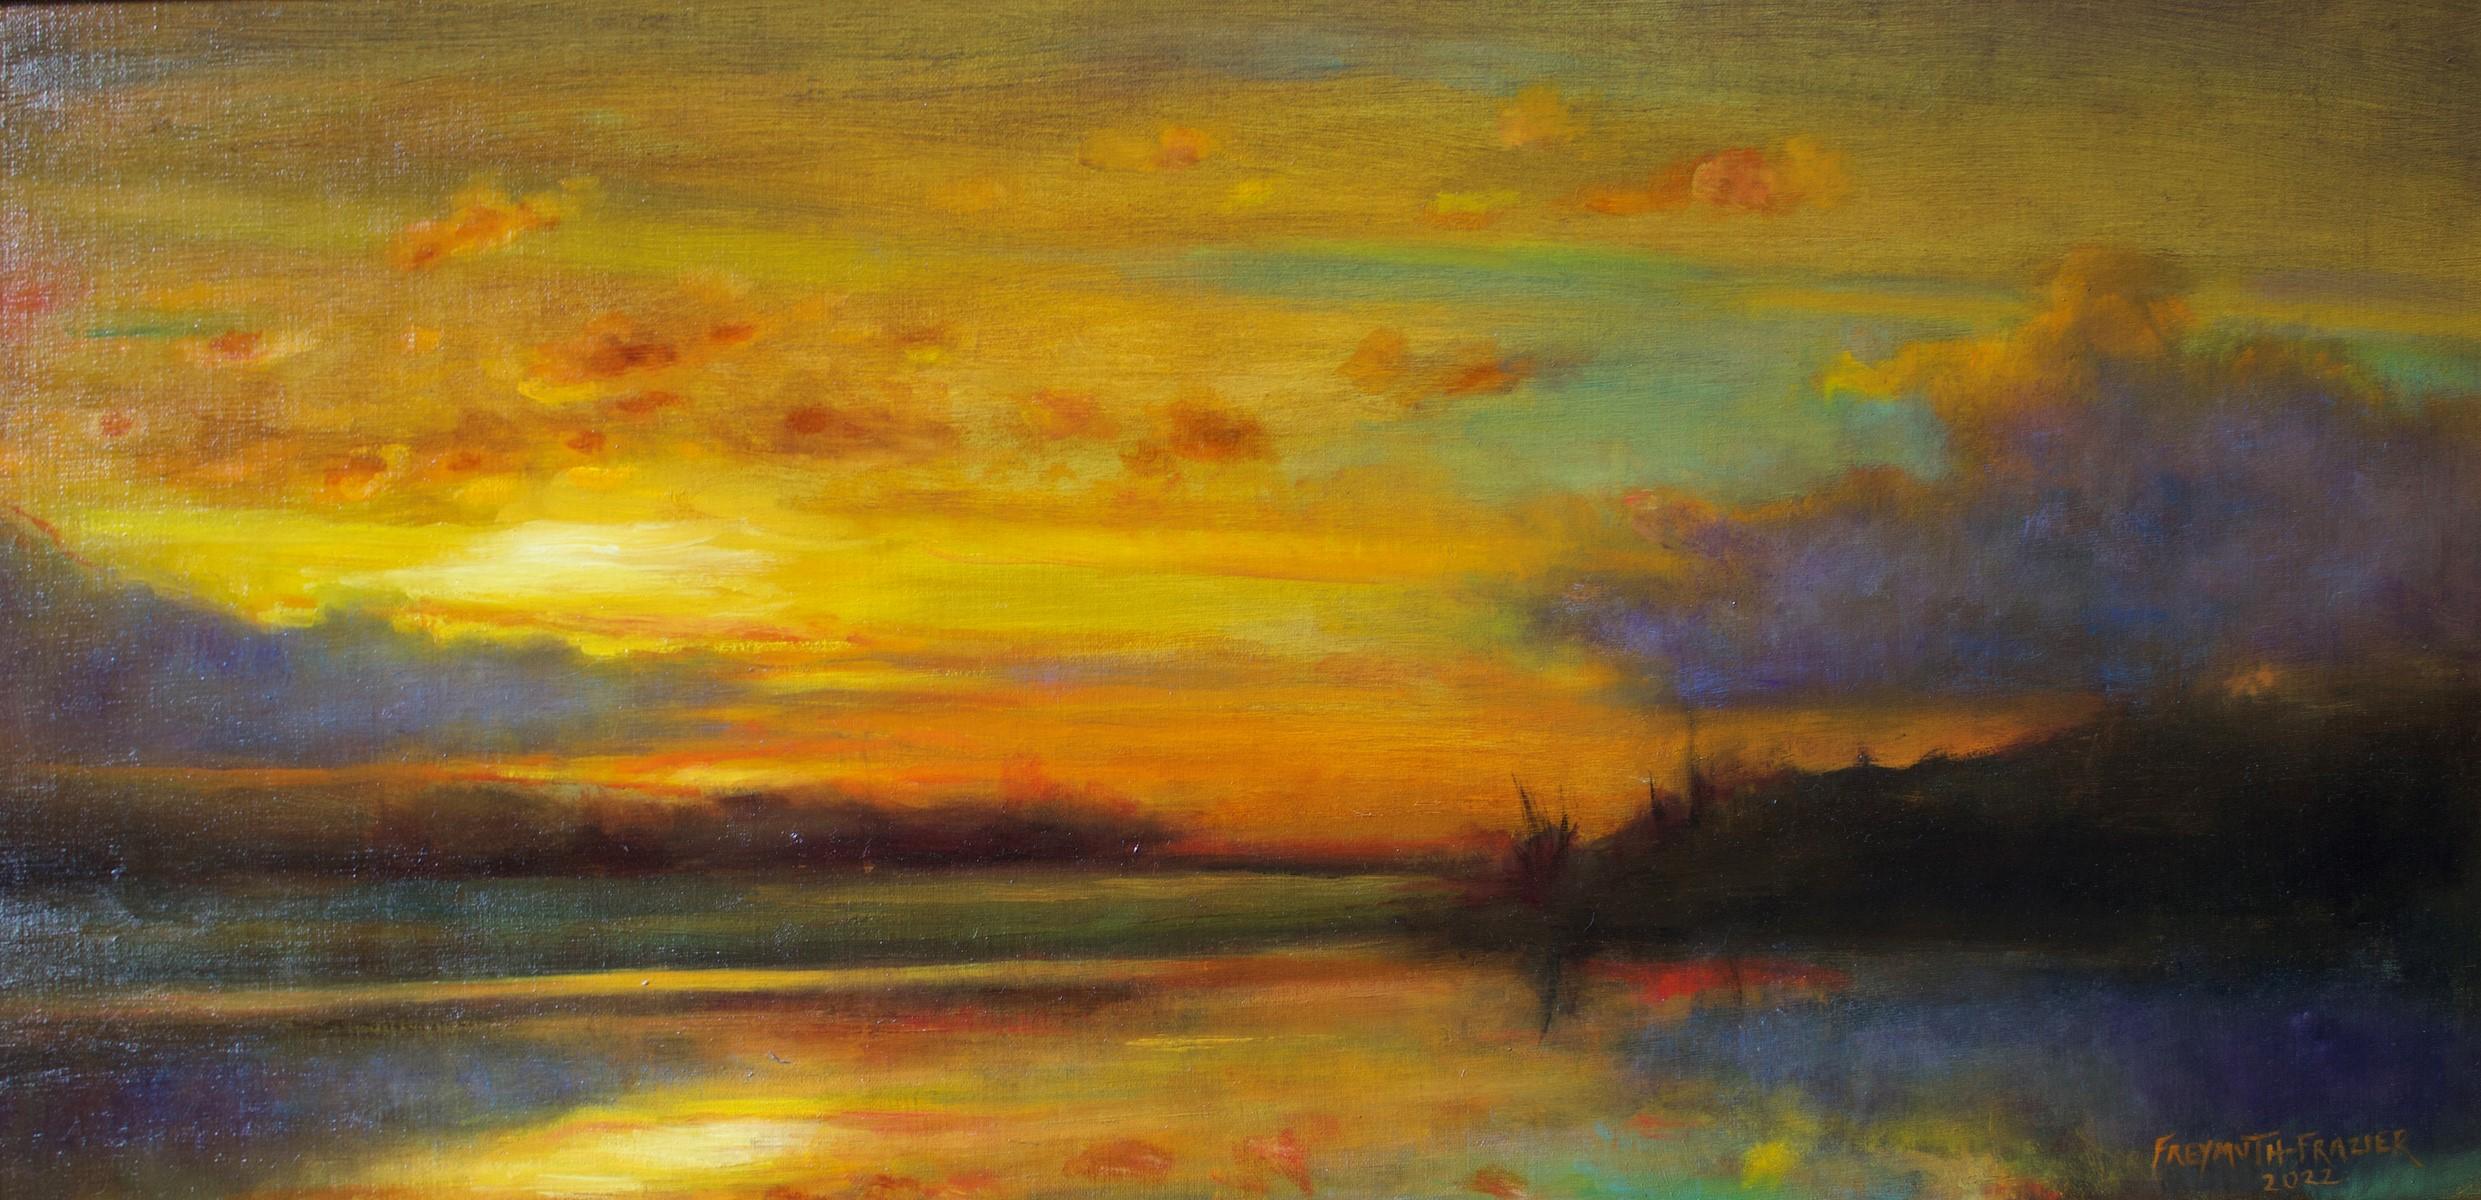 Rose Freymuth-Frazier Landscape Painting - Origin Story - Original Oil Painting w/ Setting Sun Reflecting Romantic Colors